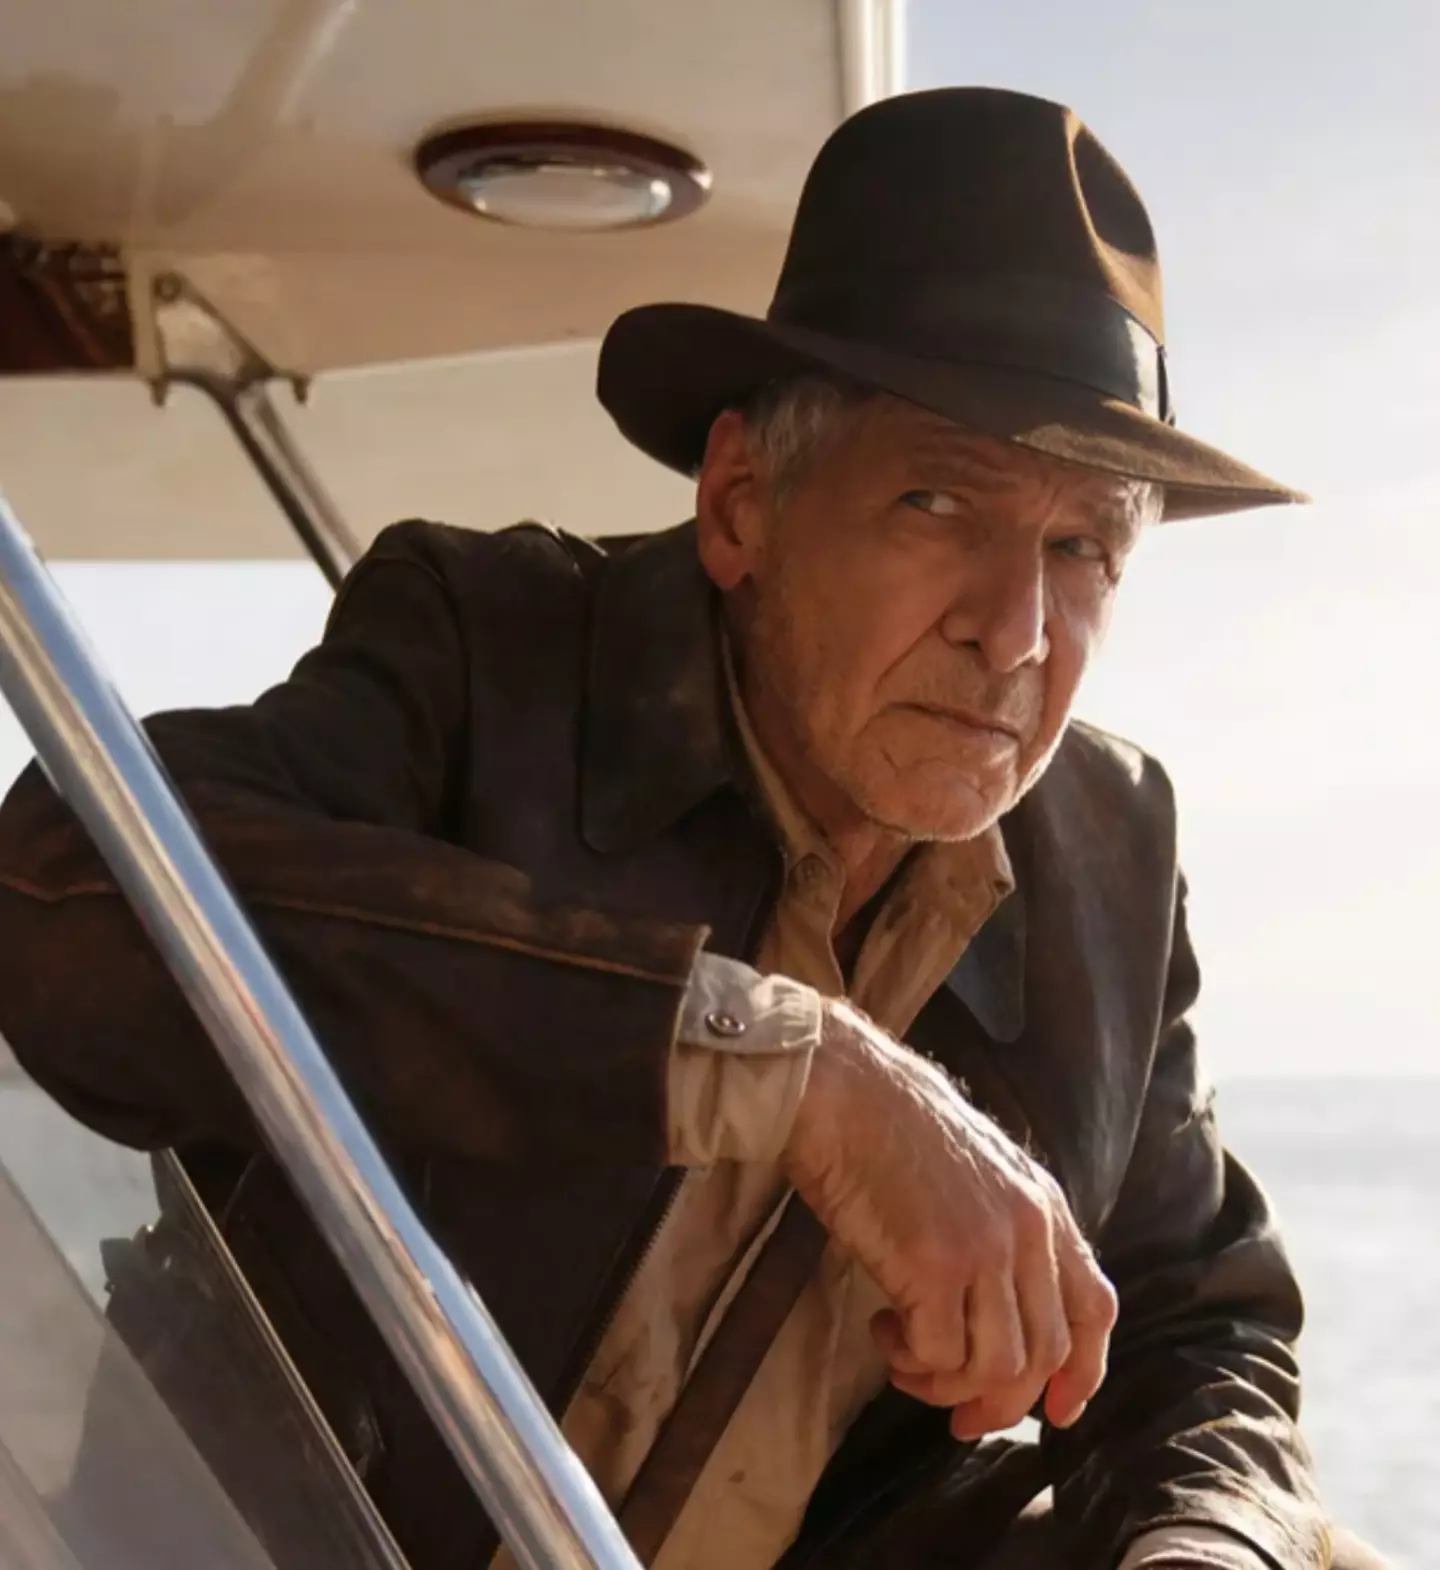 Harrison Ford has reprised his iconic role.